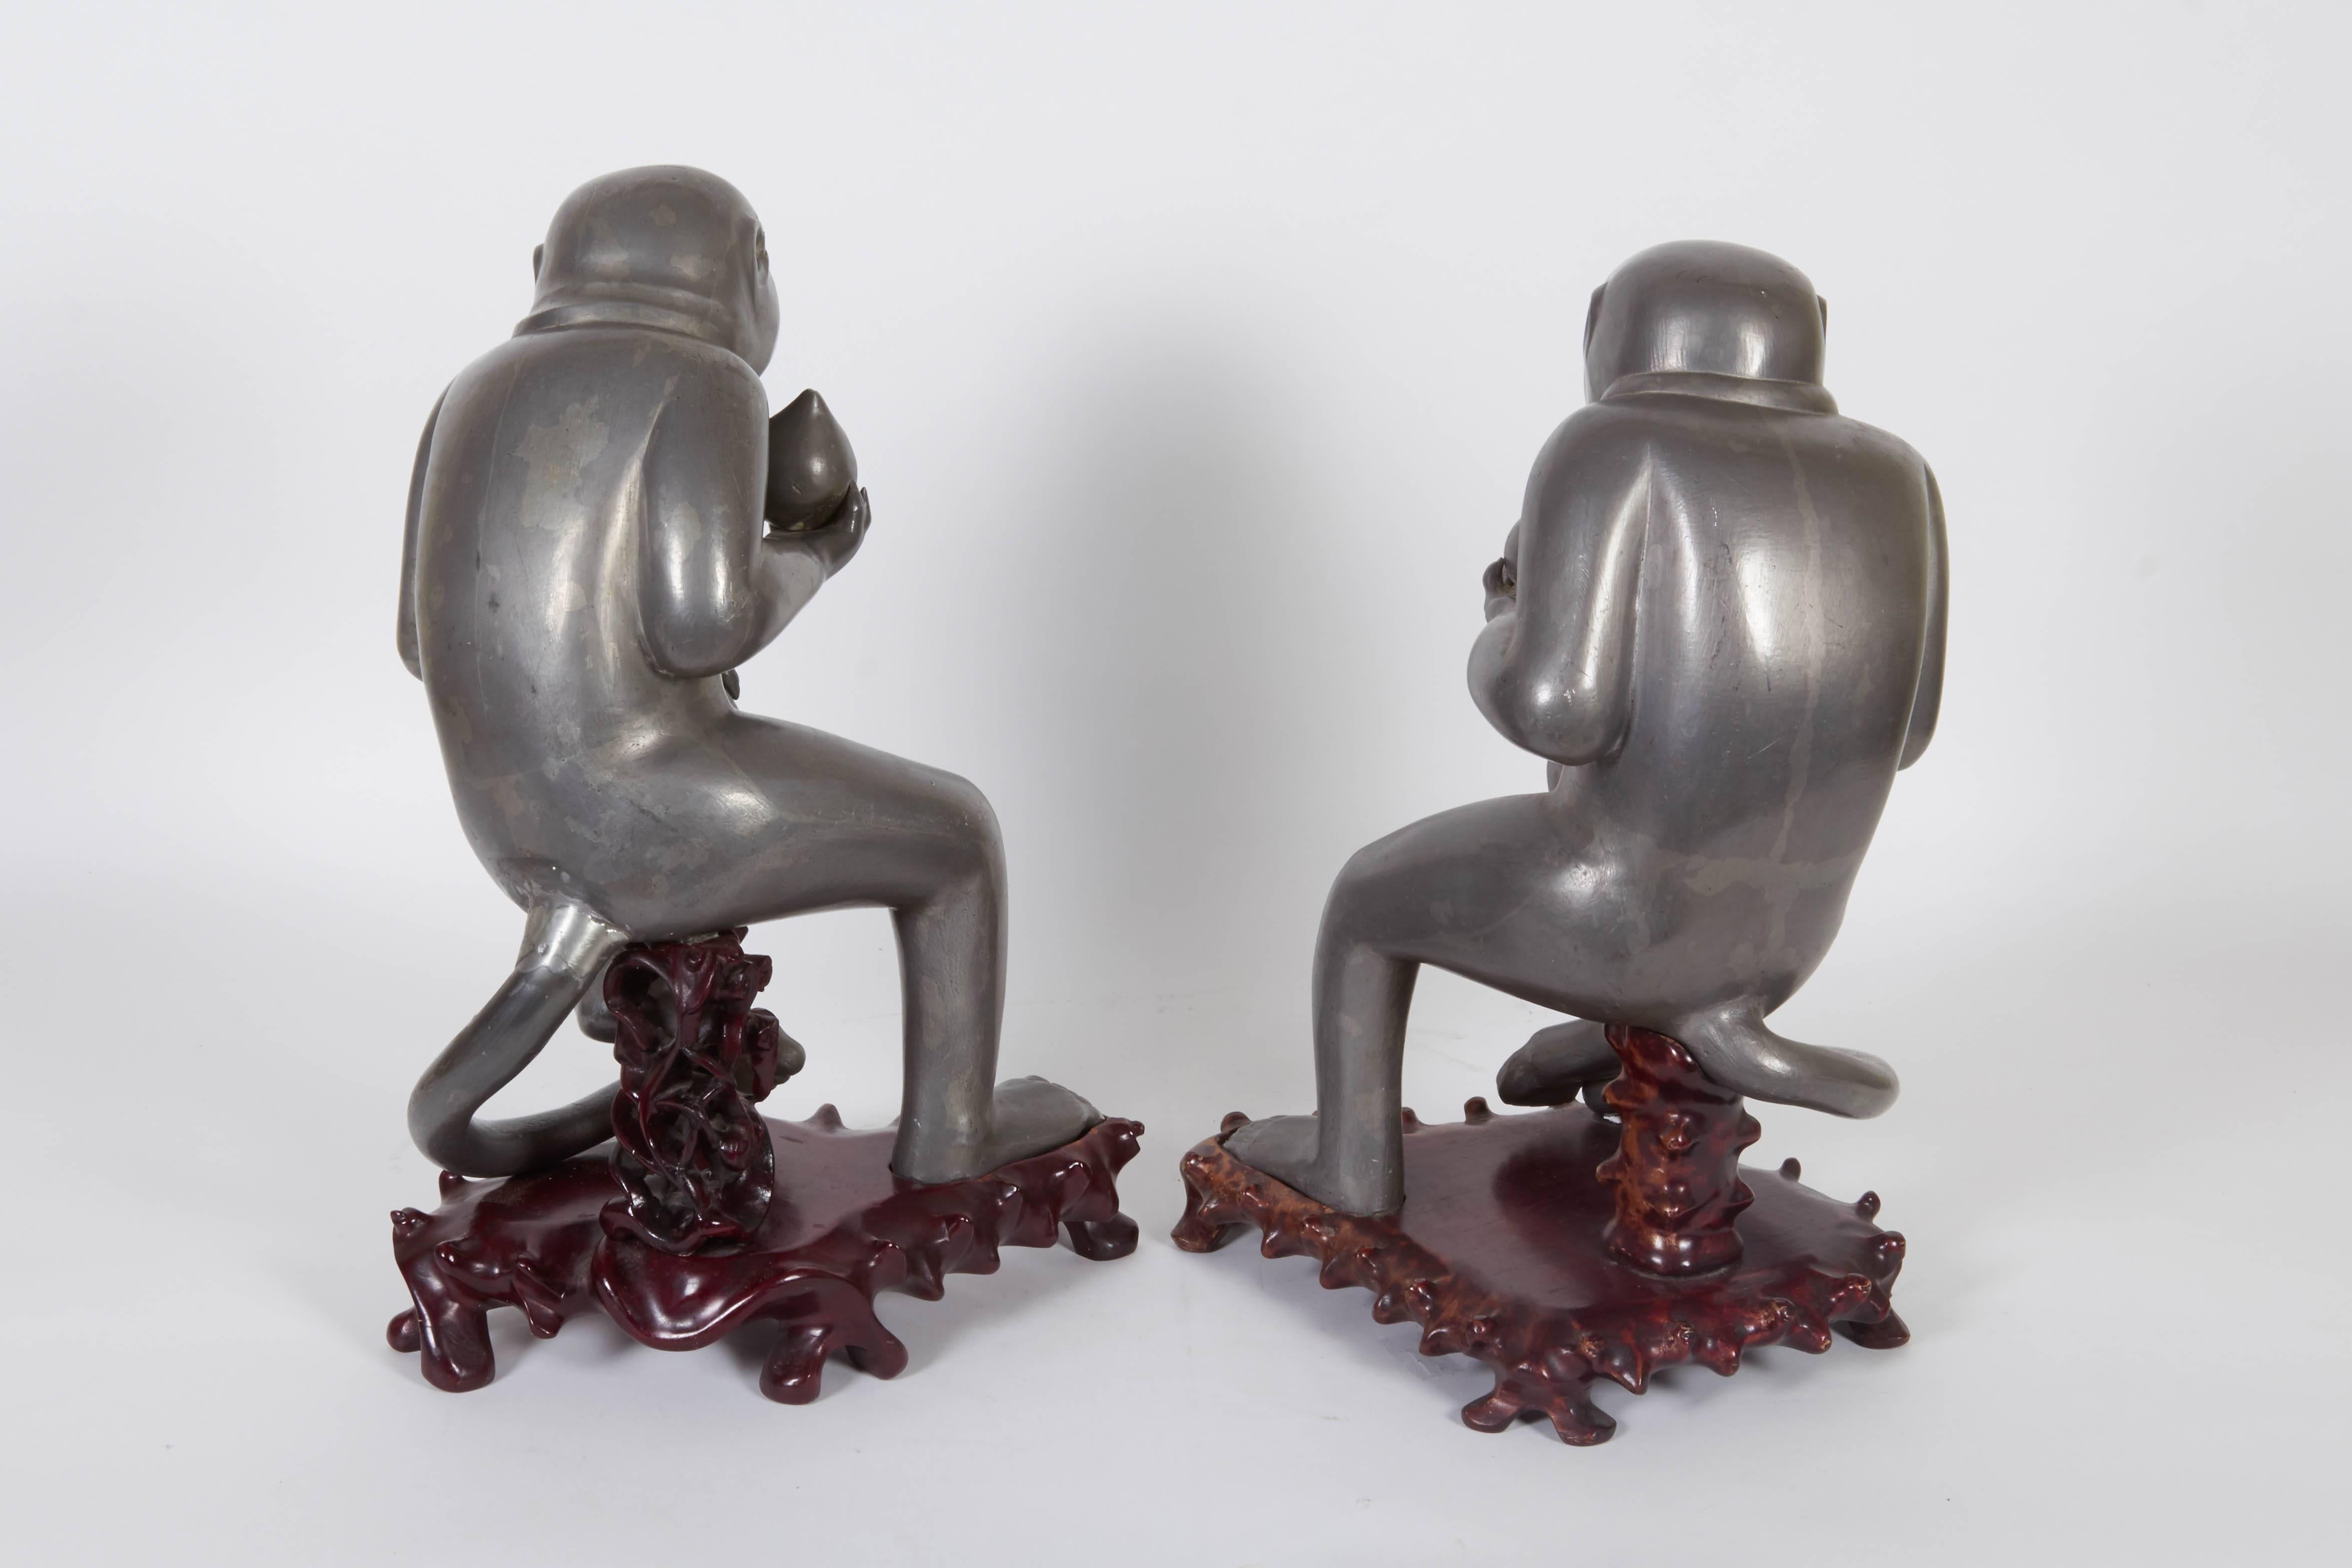 19th Century Pair of Chinese Export Pewter Monkey Sculptures on Bases